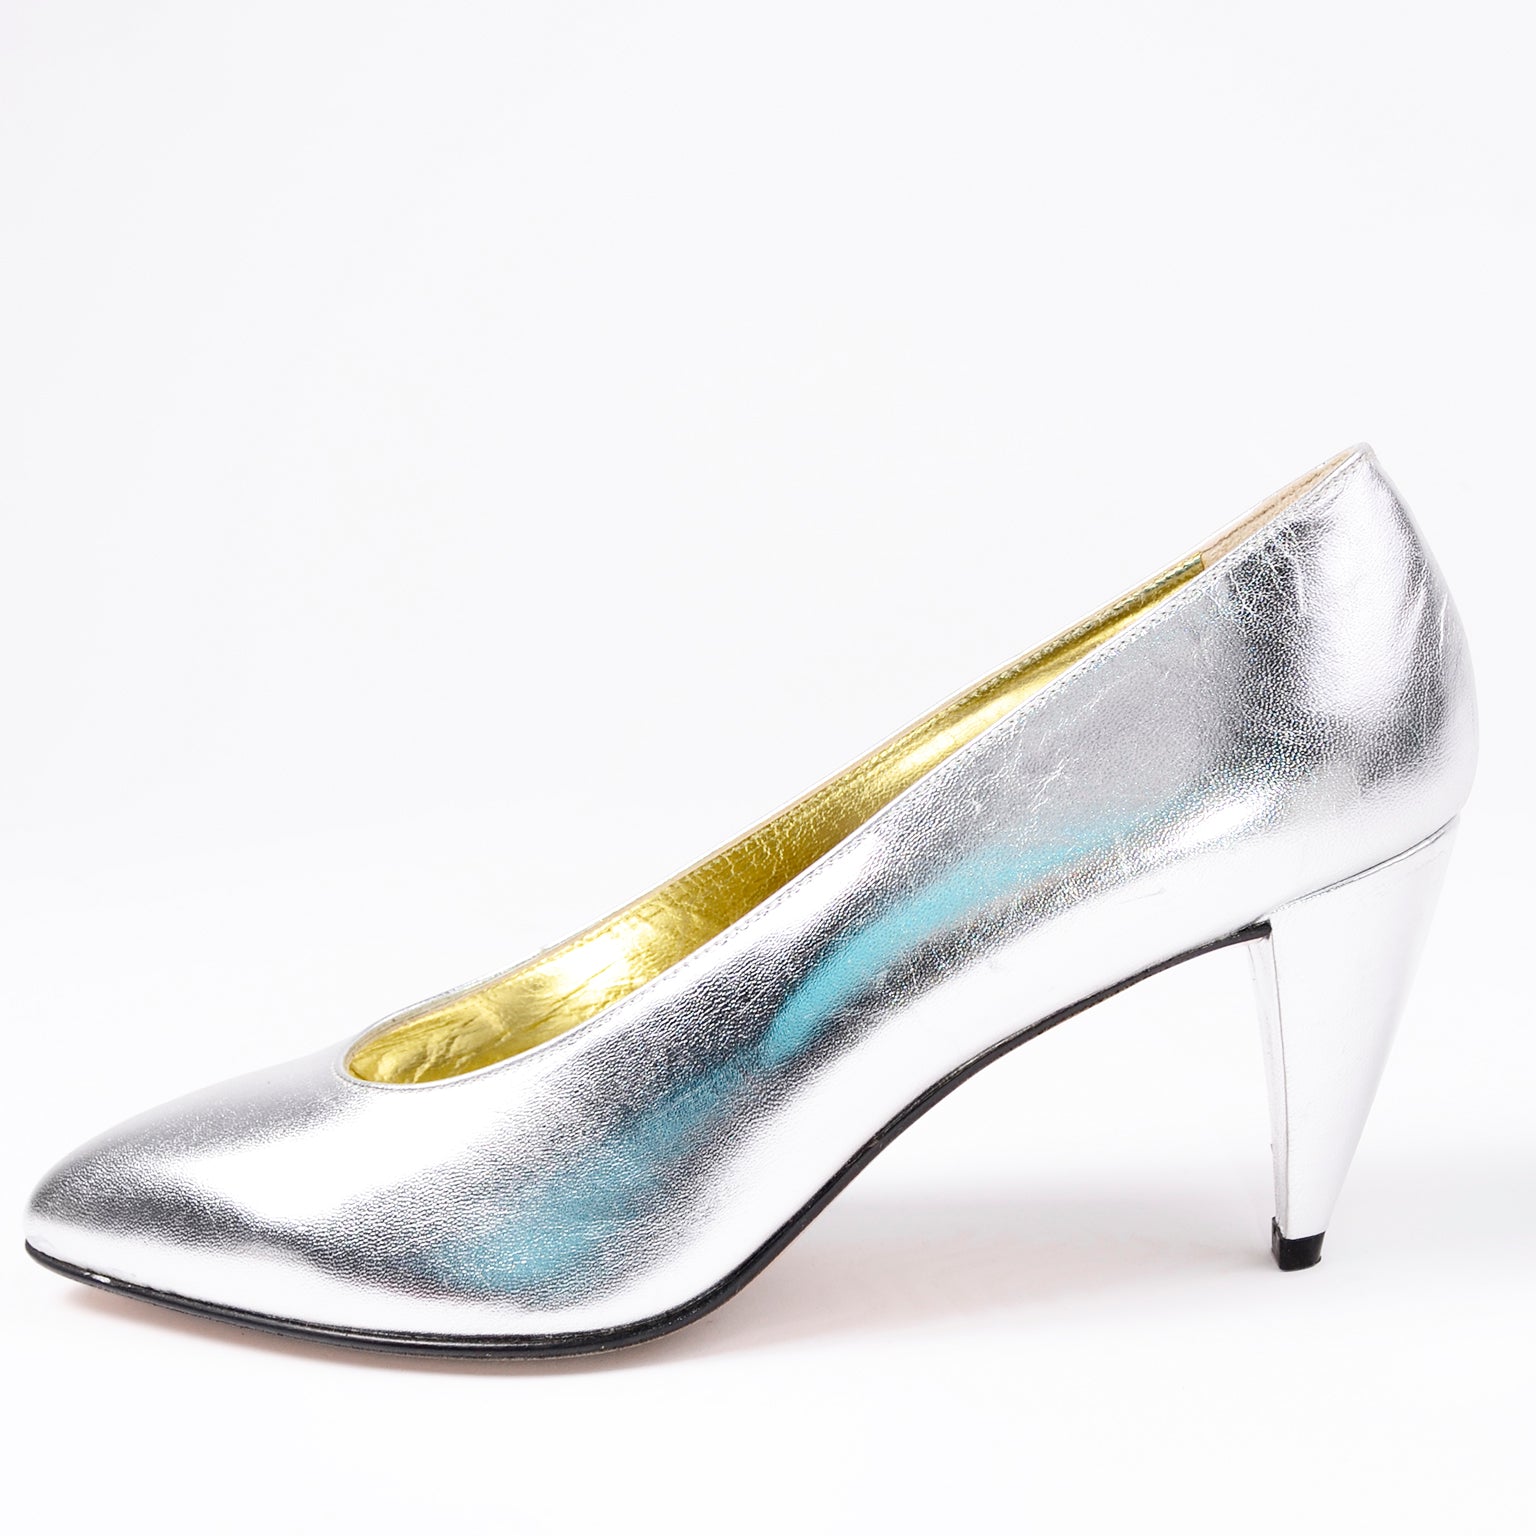 80s silver shoes sz 7.5, Vintage 1980s metallic high heels, leather